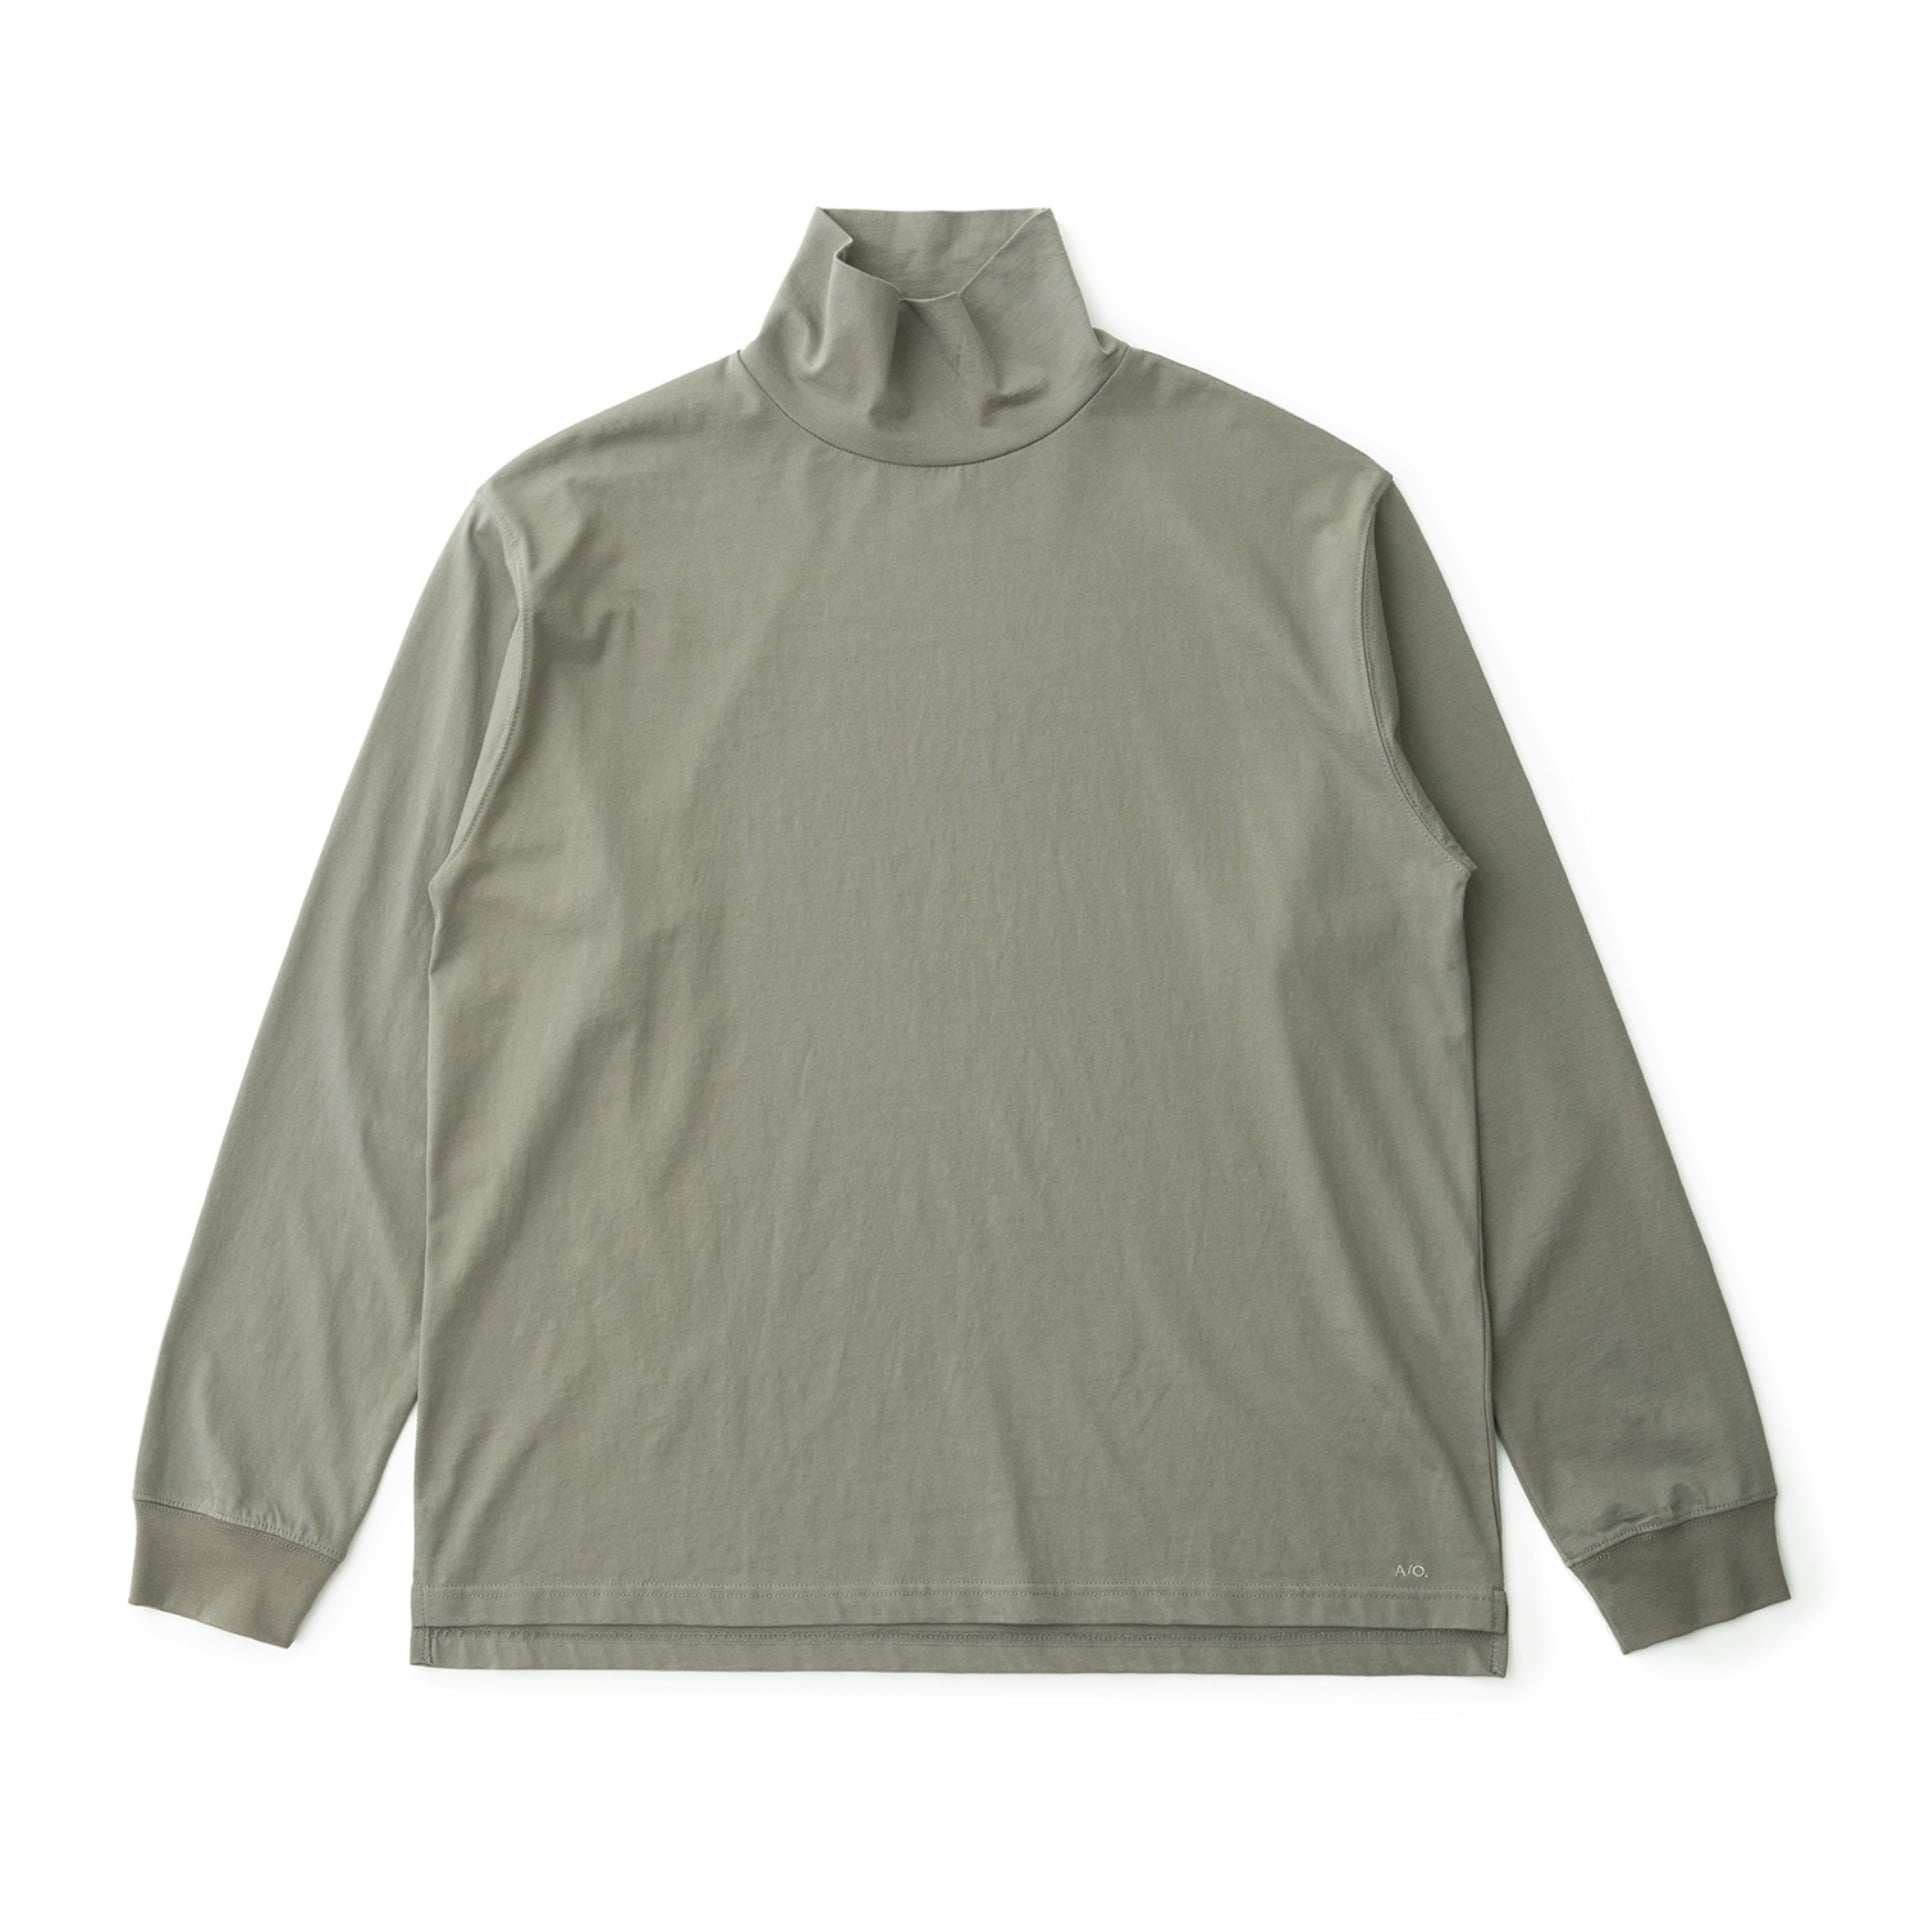 A/O Layer Hi Neck T (French Gray)